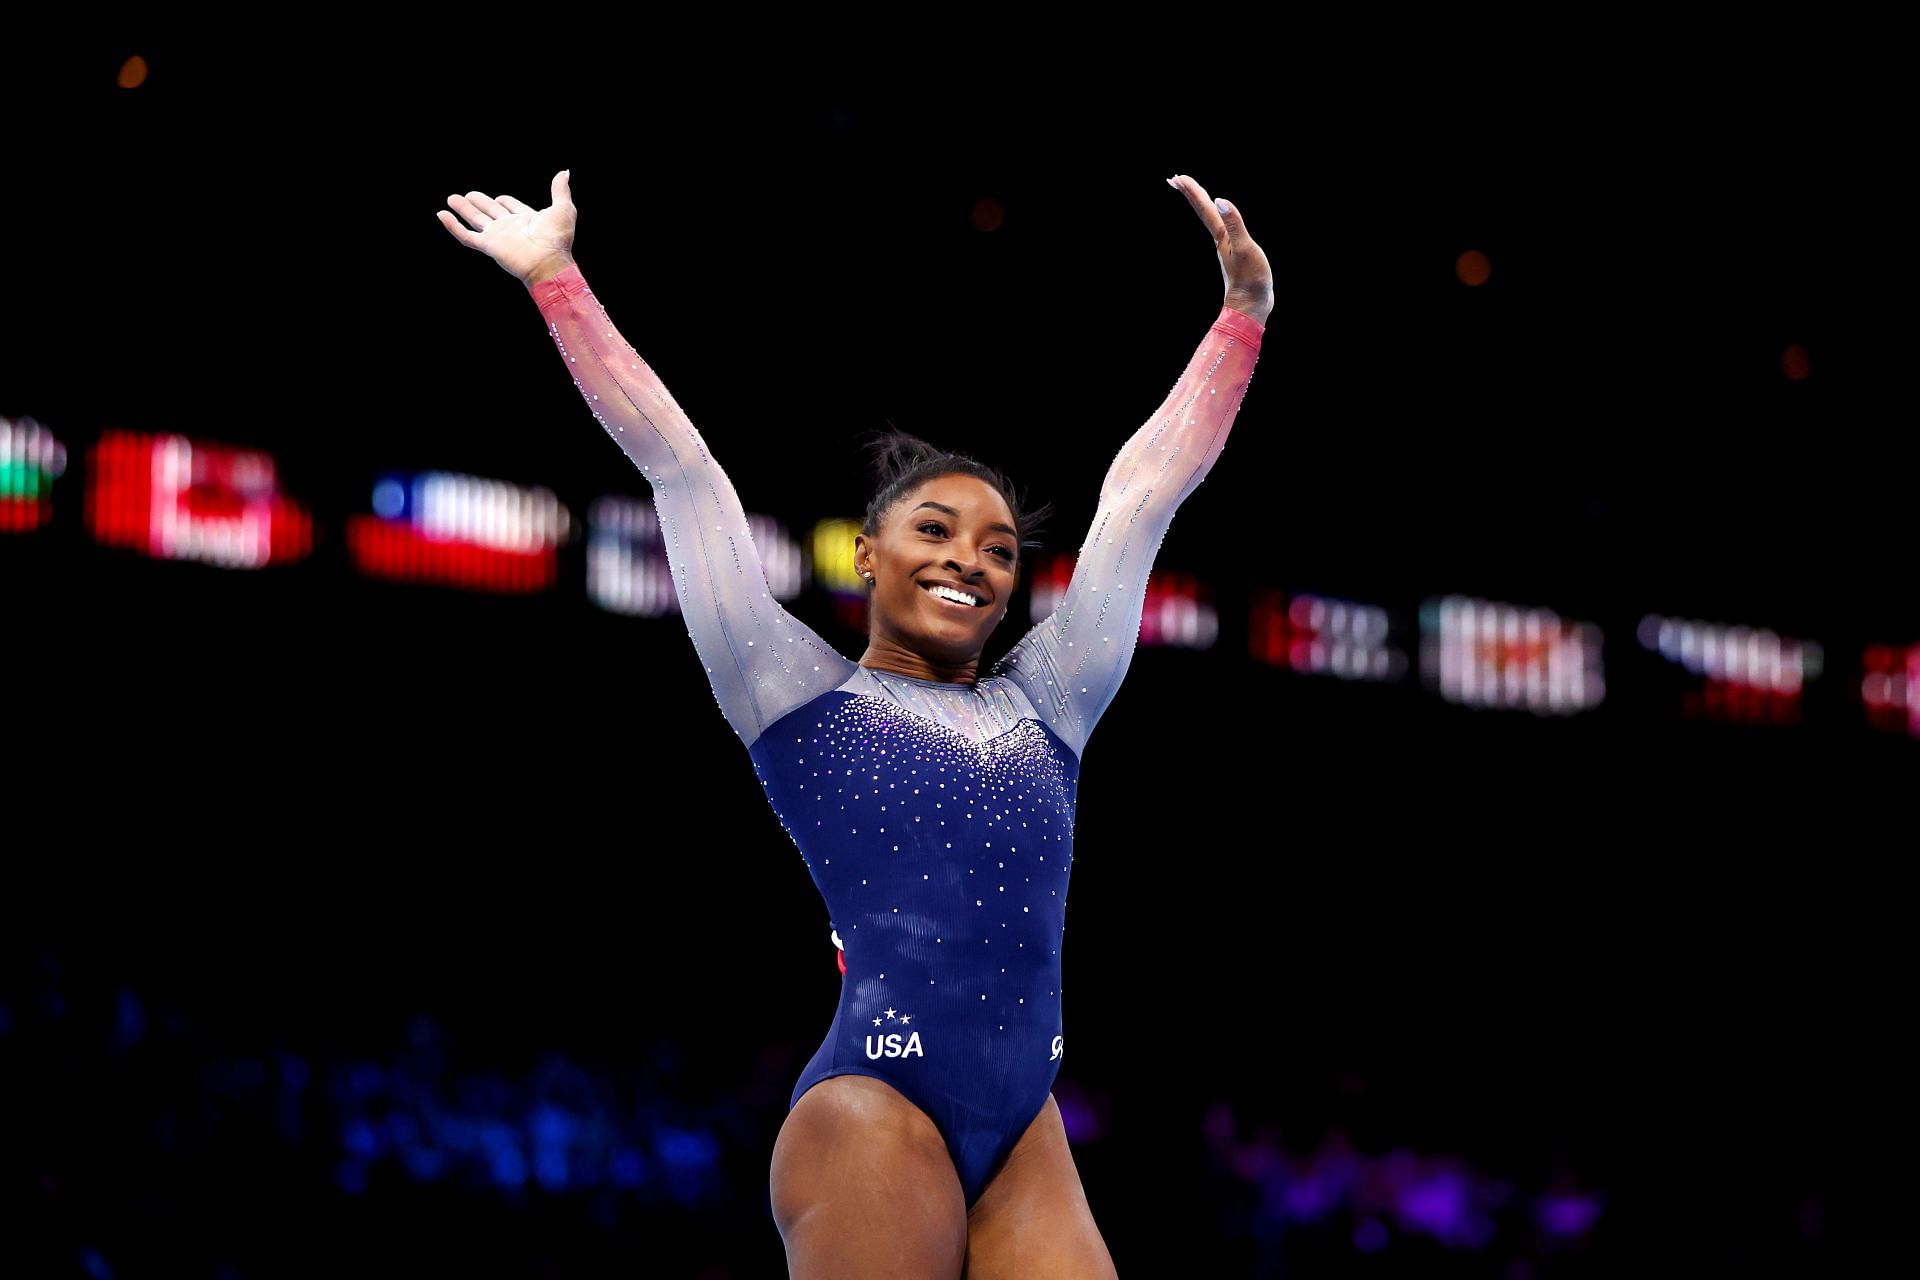 Simone Biles after her routine on Floor Exercise at the 2023 World Artistic Gymnastics Championships in Antwerp, Belgium.